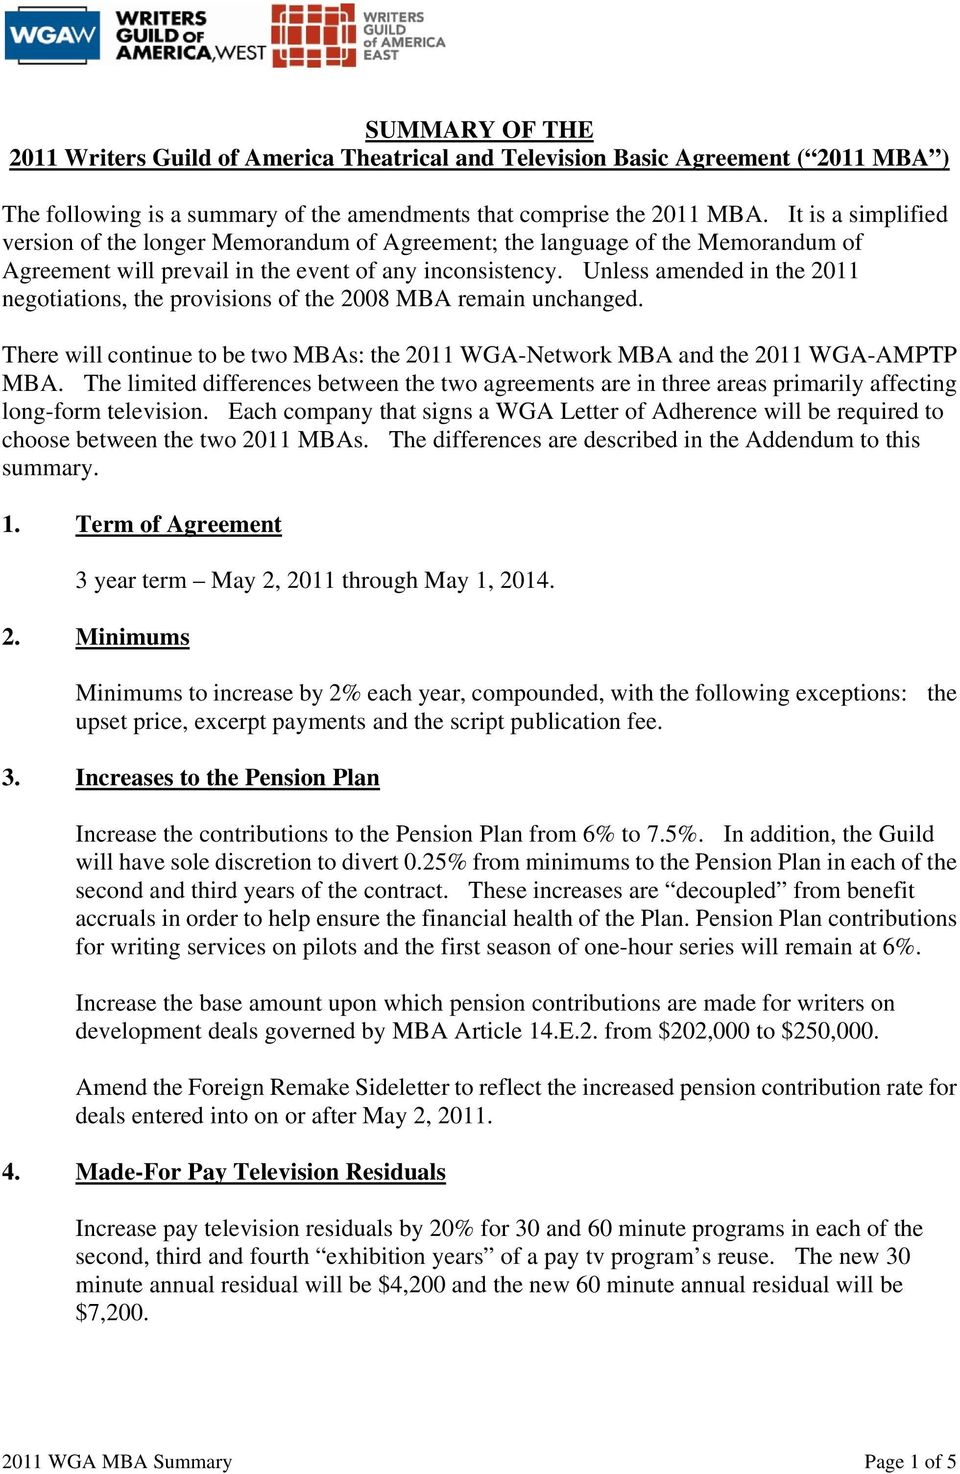 Wga Basic Agreement Summary Of The 2011 Writers Guild Of America Theatrical And